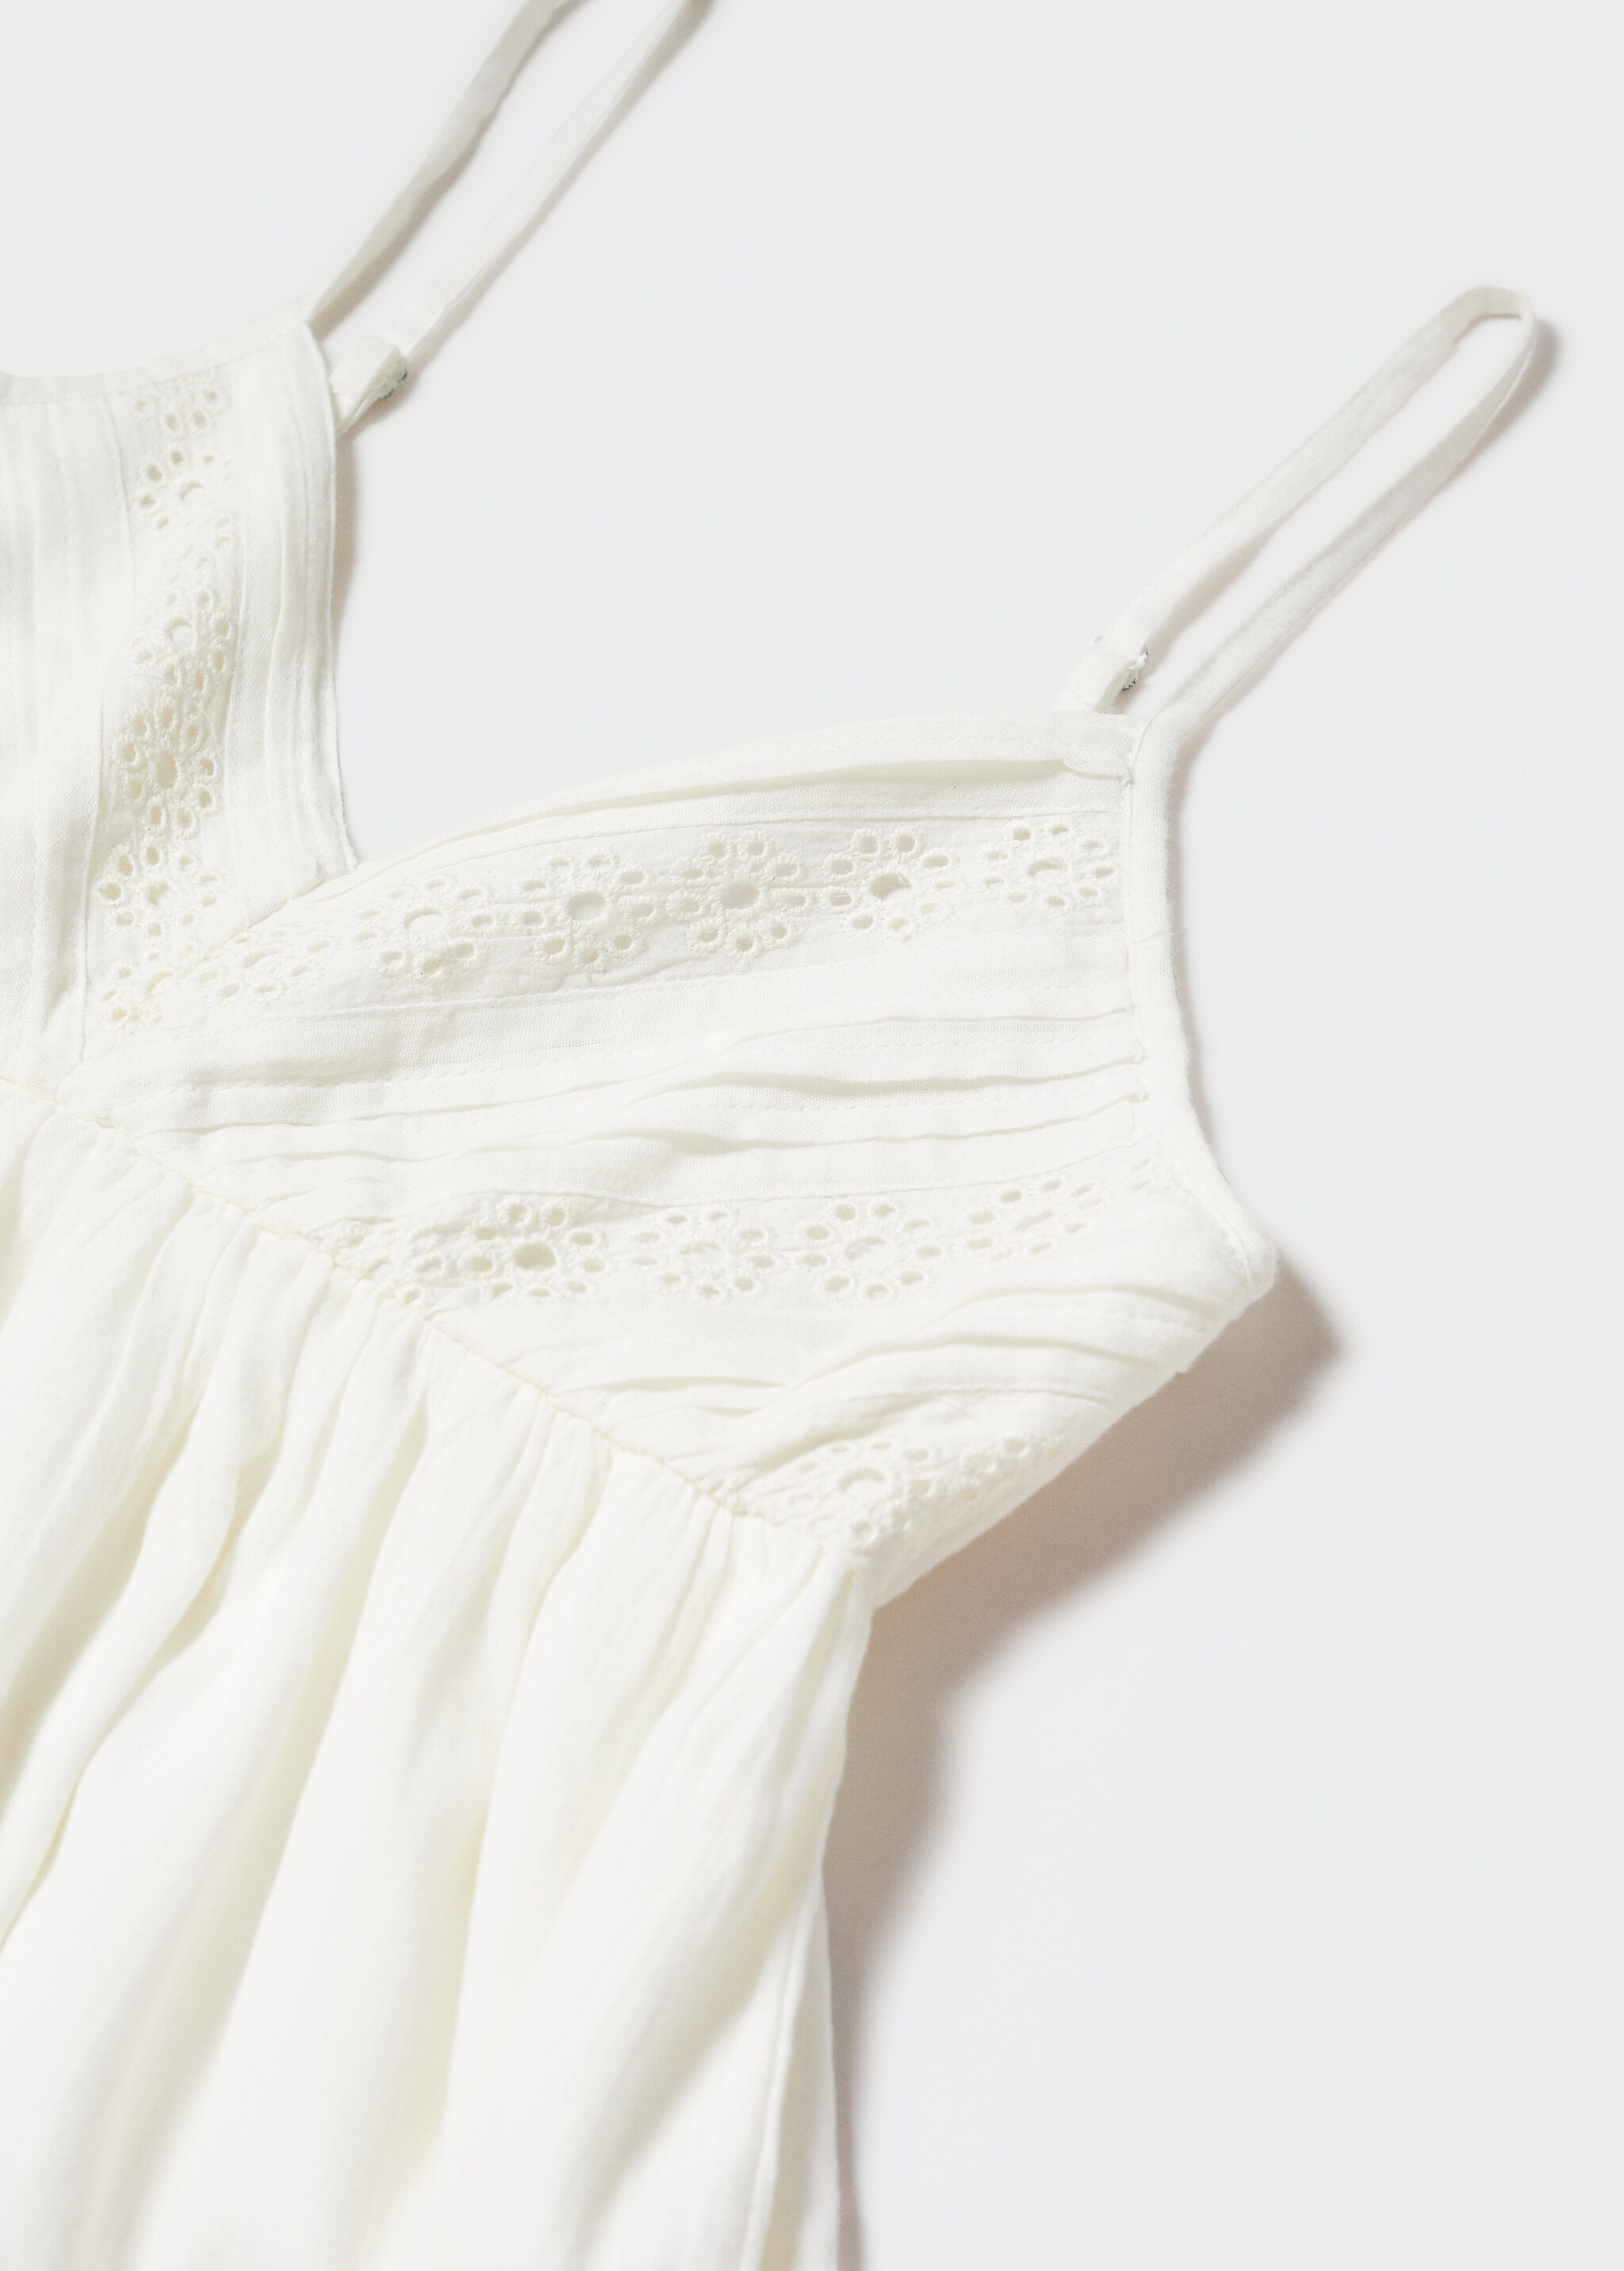 Embroidered cotton dress - Details of the article 8